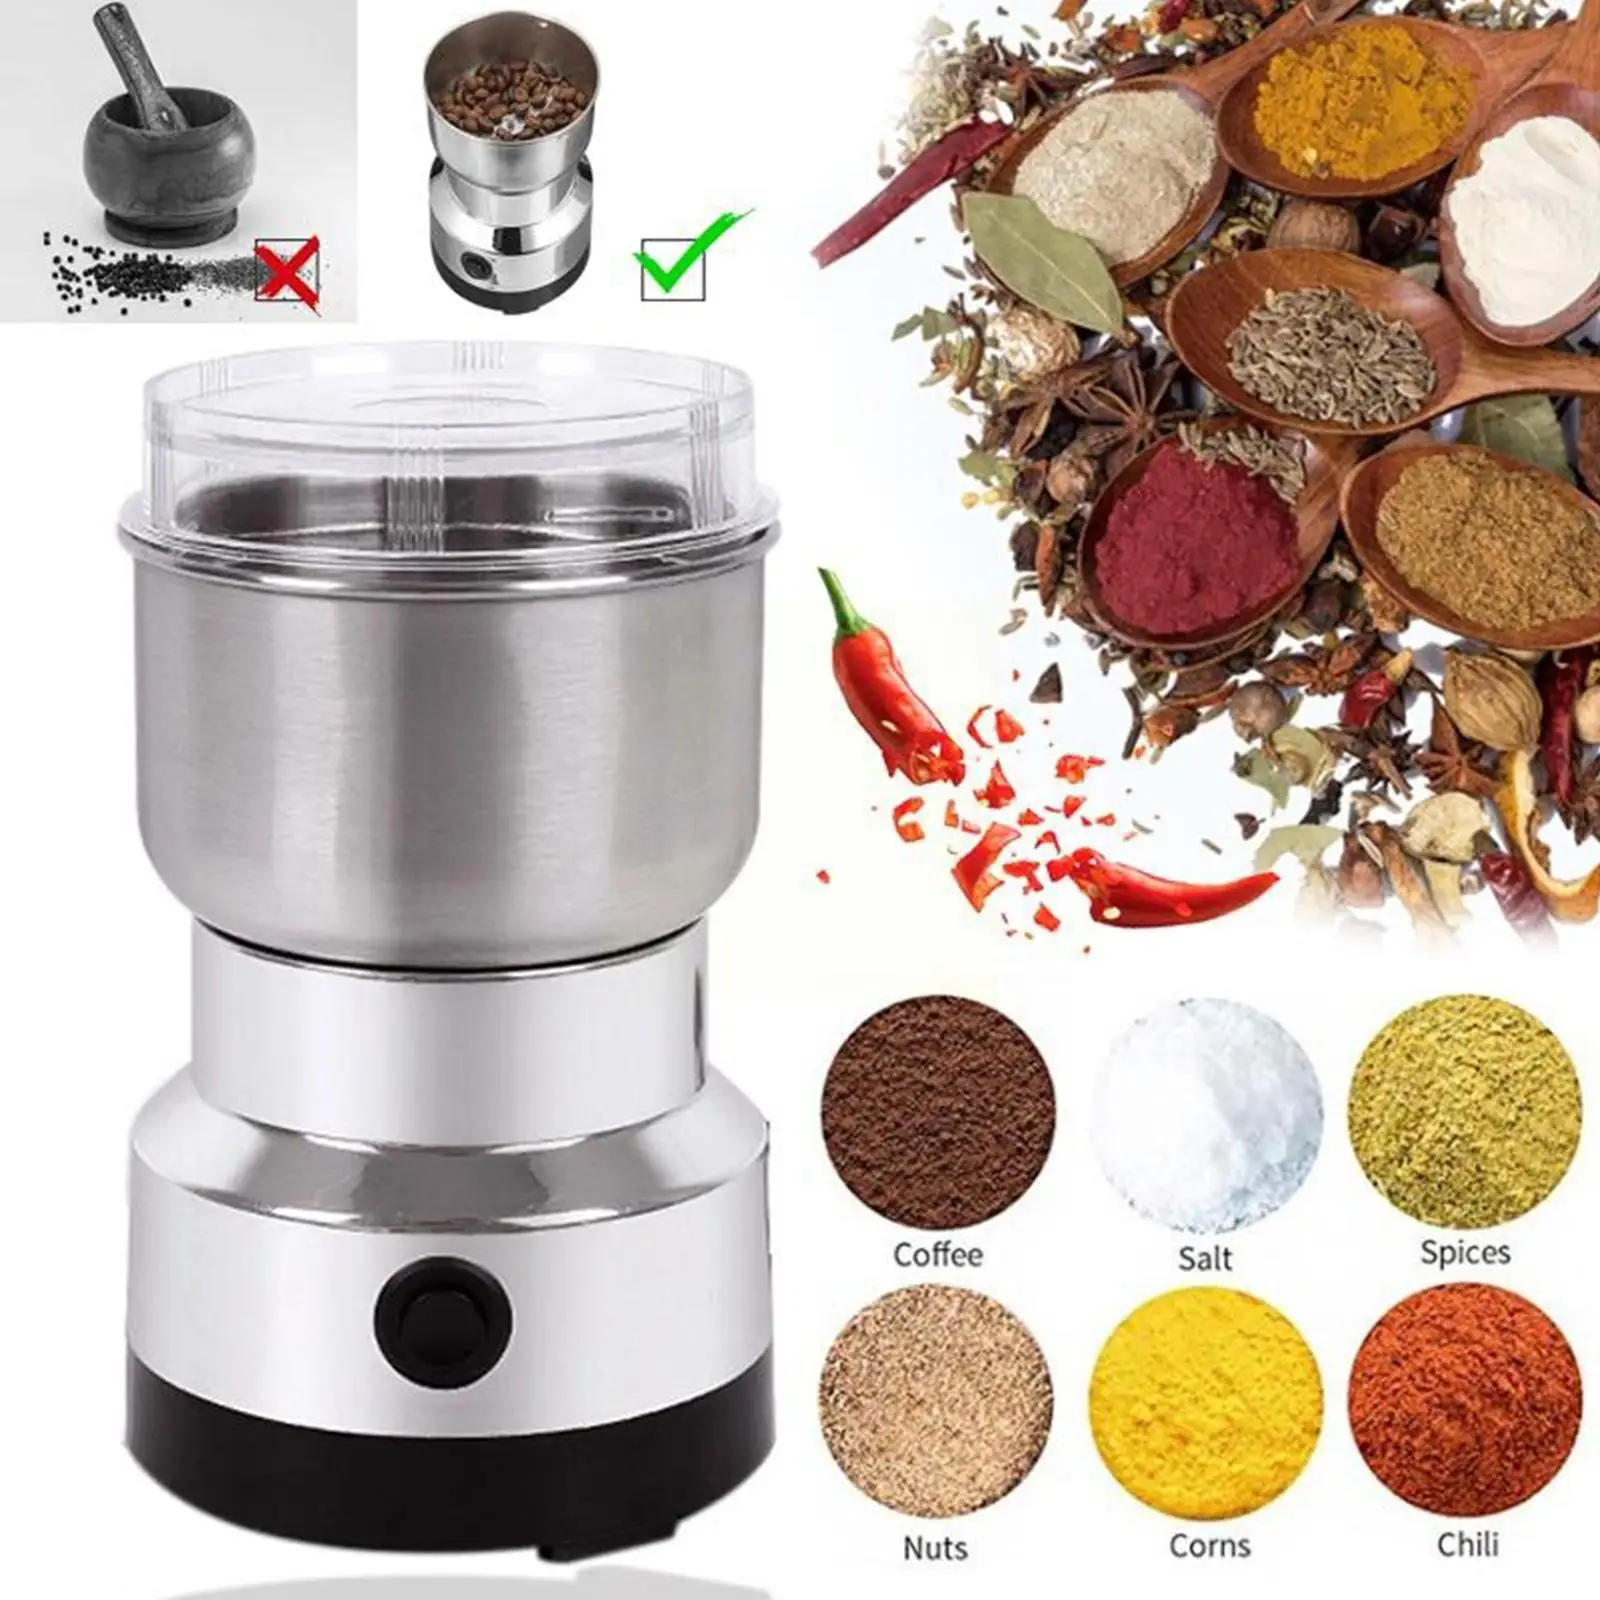 

Electric Coffee Grinder 150W 220V Kitchen Cereals Beans Grinding Coffee Home Nuts Multifunctional Bean Spices Machine Grind F0E0